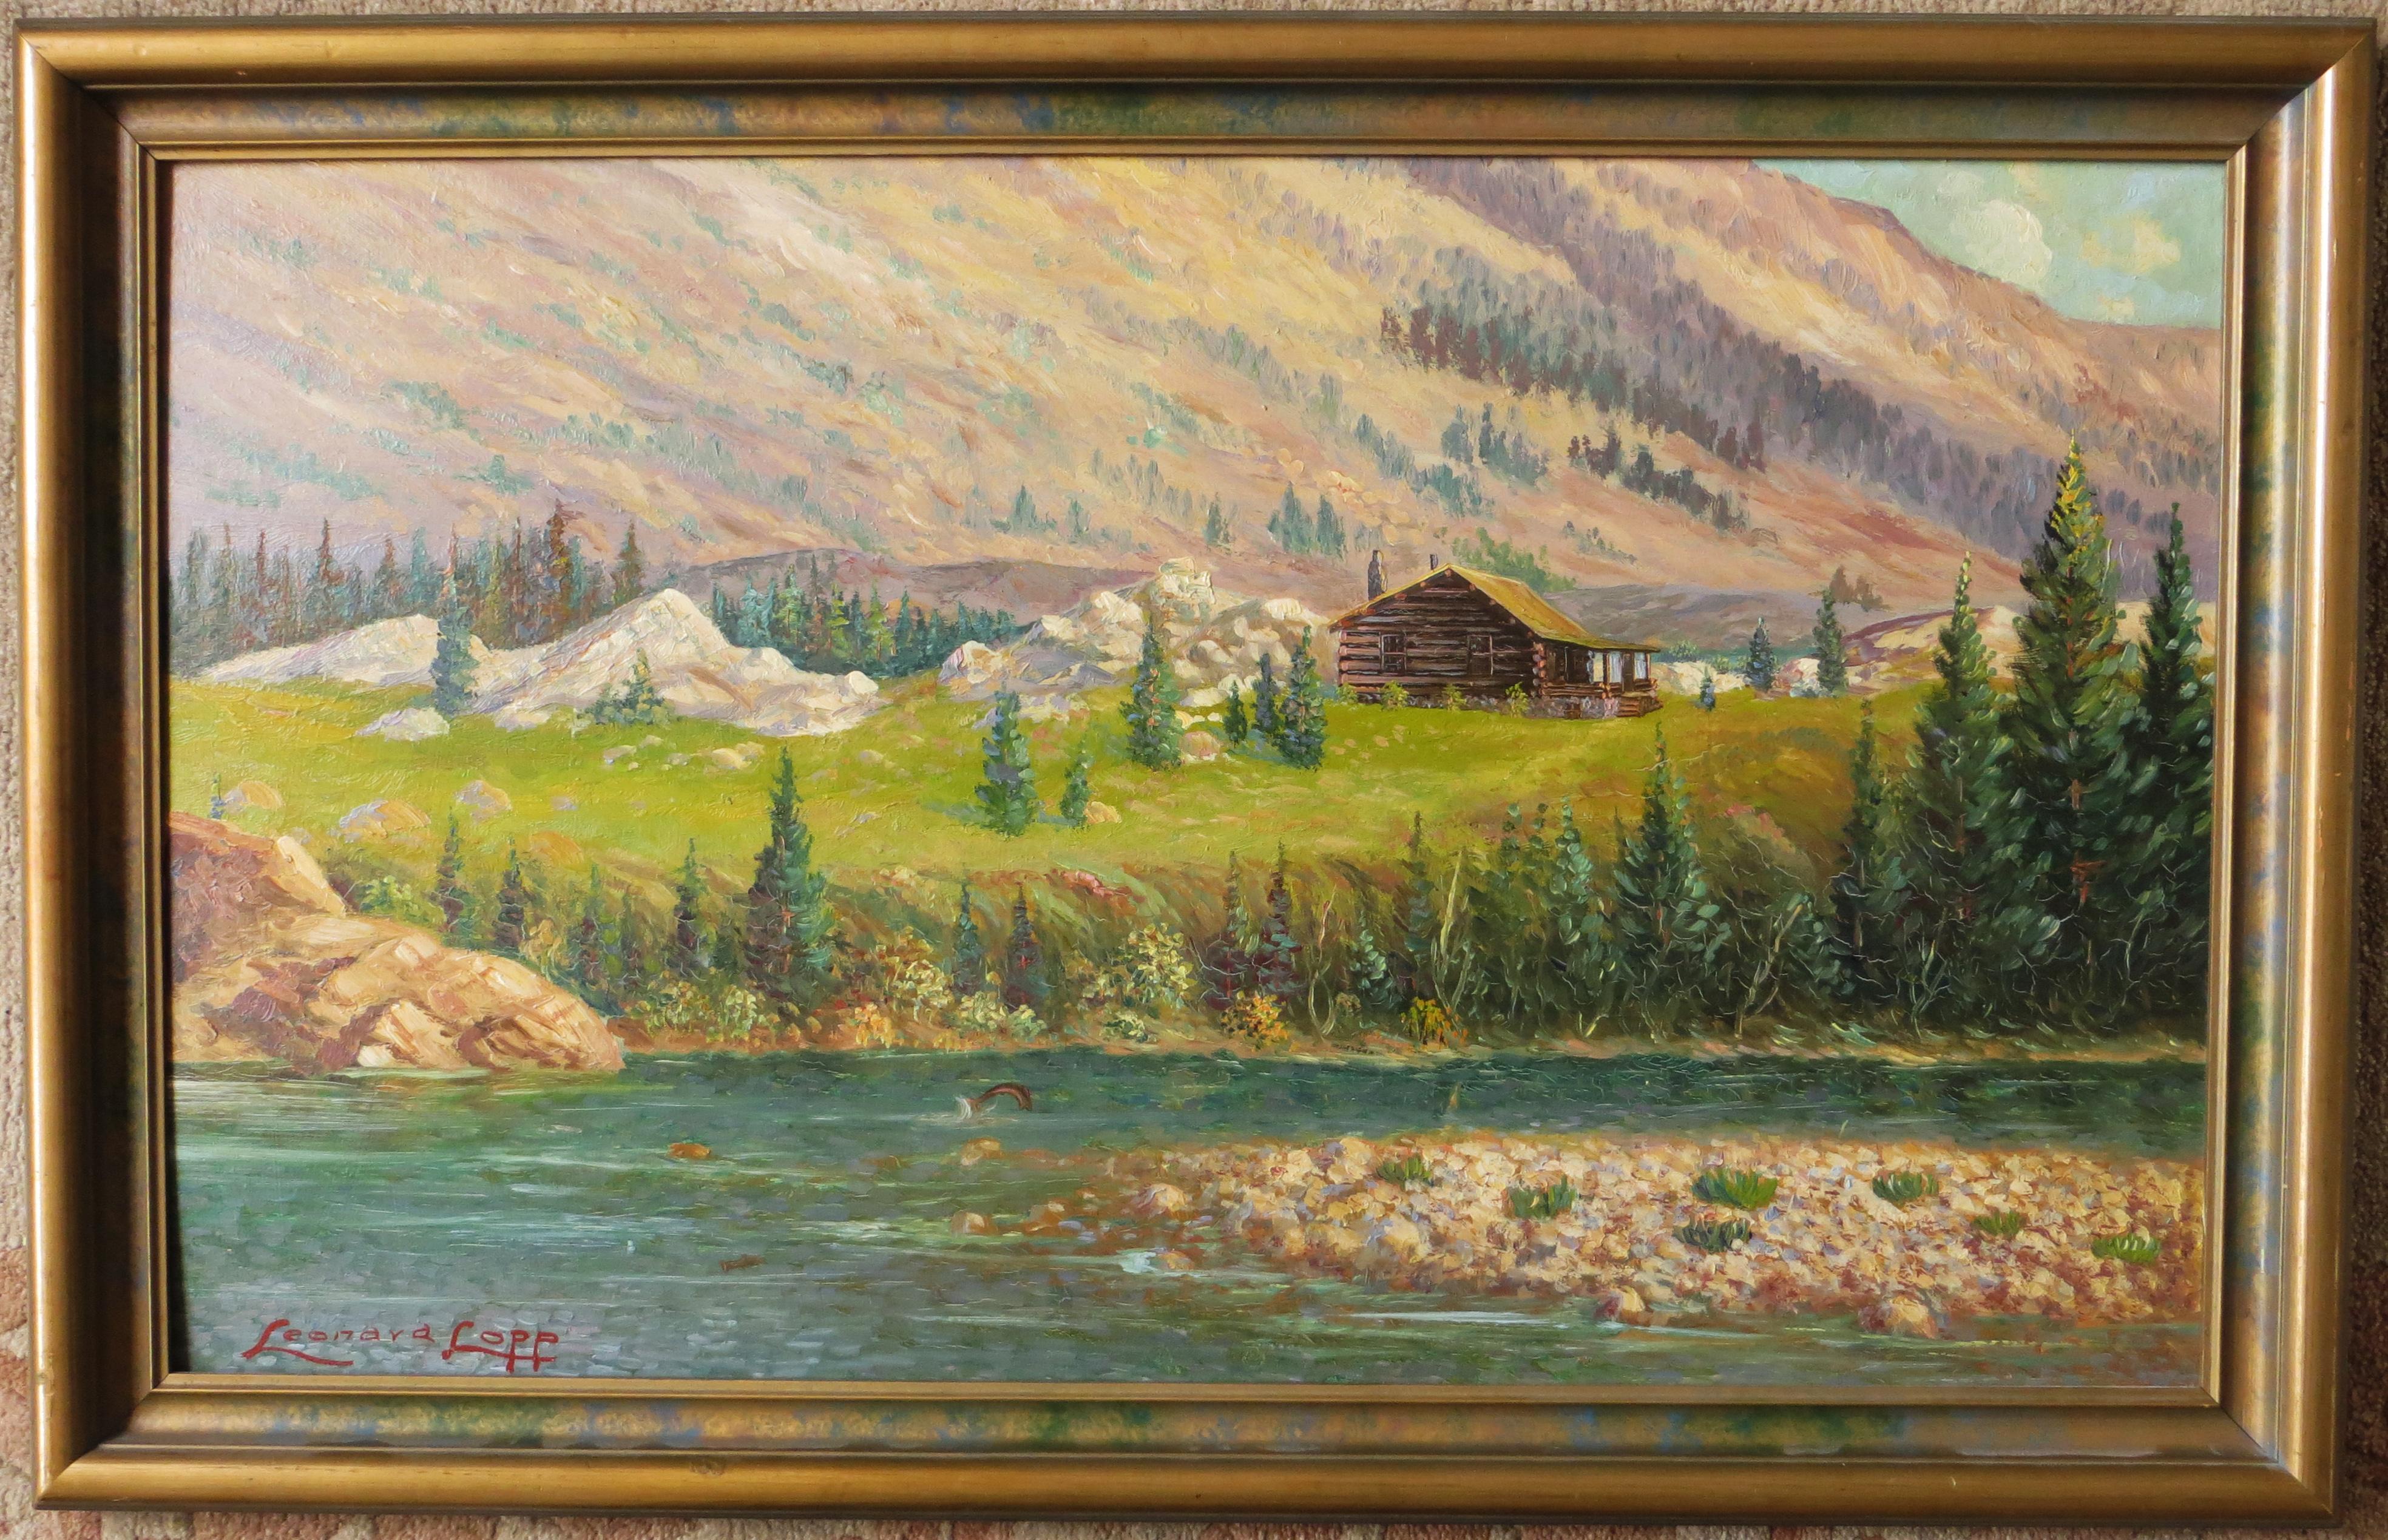 This oil on board painting depicts what looks like the Northern Rockies, probably in Montana. The painting has many interesting textures as the artist has sought to render land, water vegetation and sky with careful brushwork. The painting measures